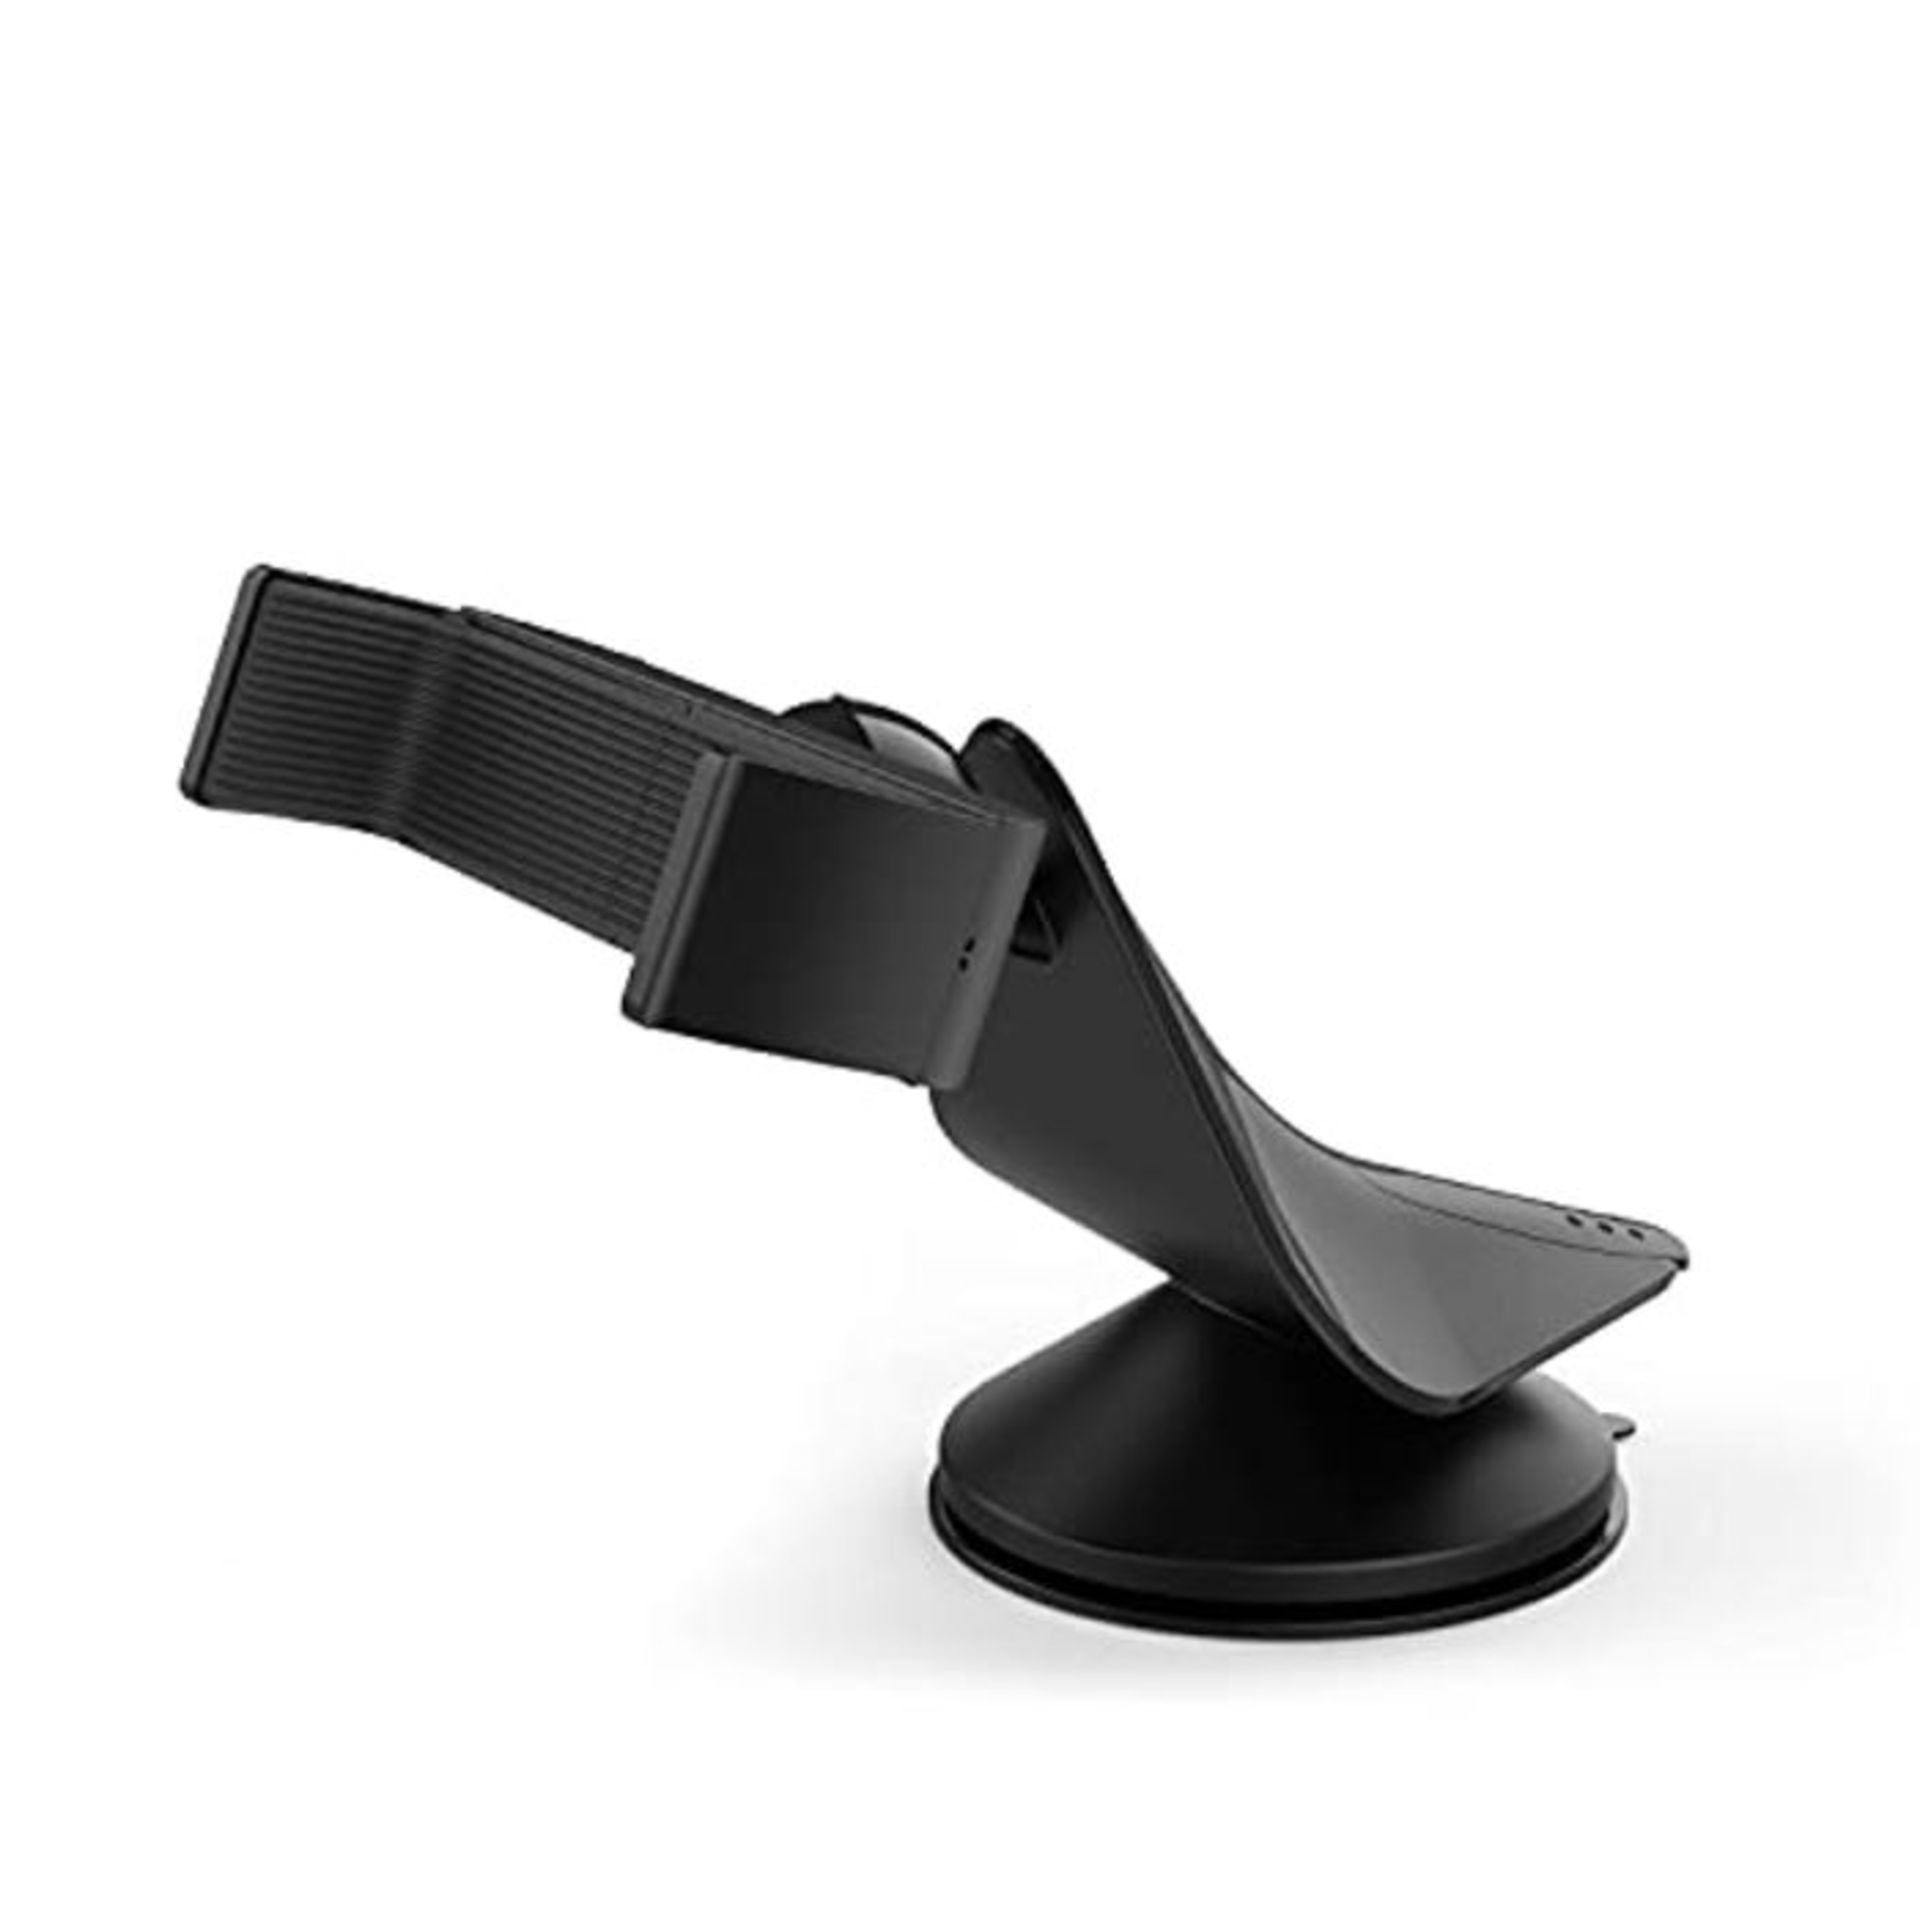 Arteck Car Mount, Universal Mobile Phone Car Mount Holder 360° Rotation for Auto Wind